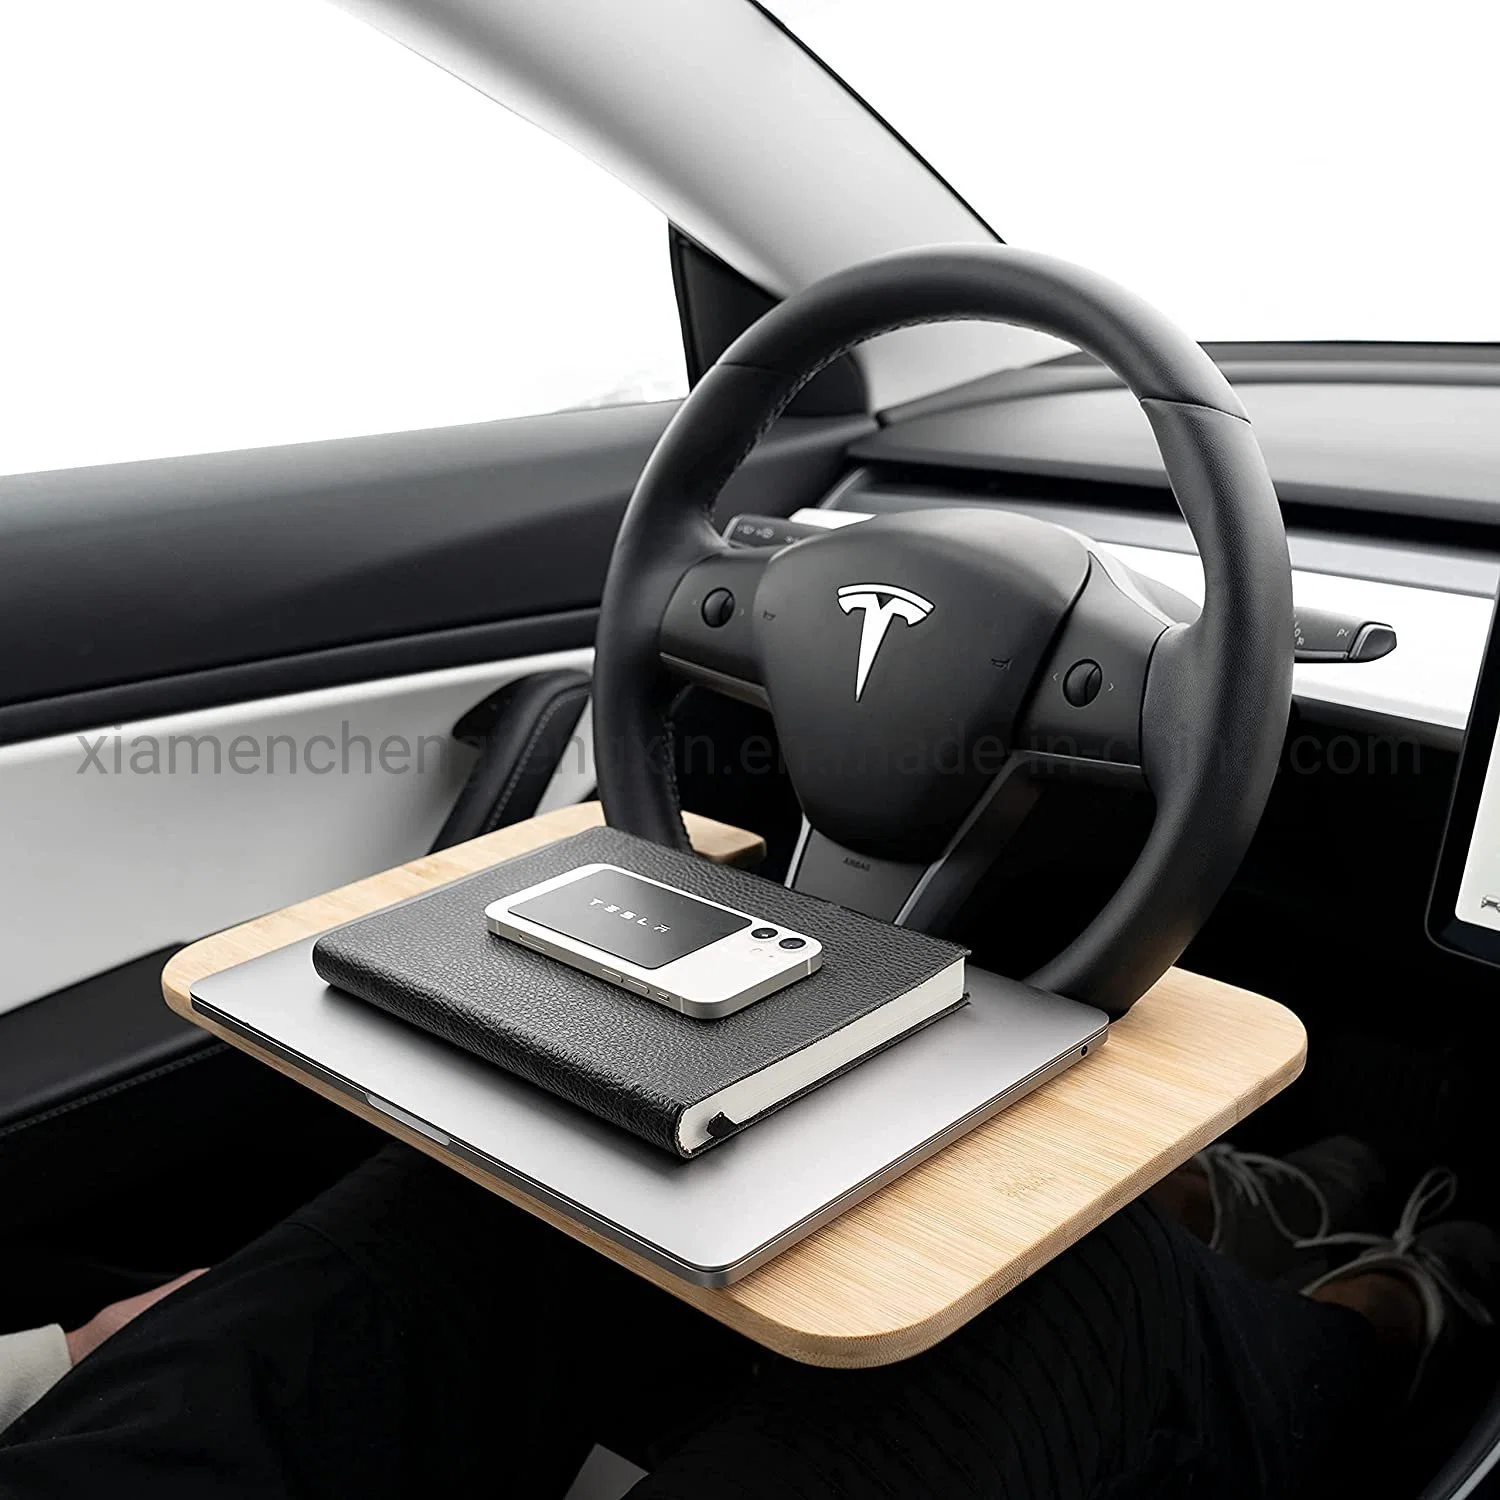 Steering Wheel Tray - Eat Lunch Comfortably in Your Car - Car Laptop Desk for Working Remotely - Fits Most Cars Including Tesla Model